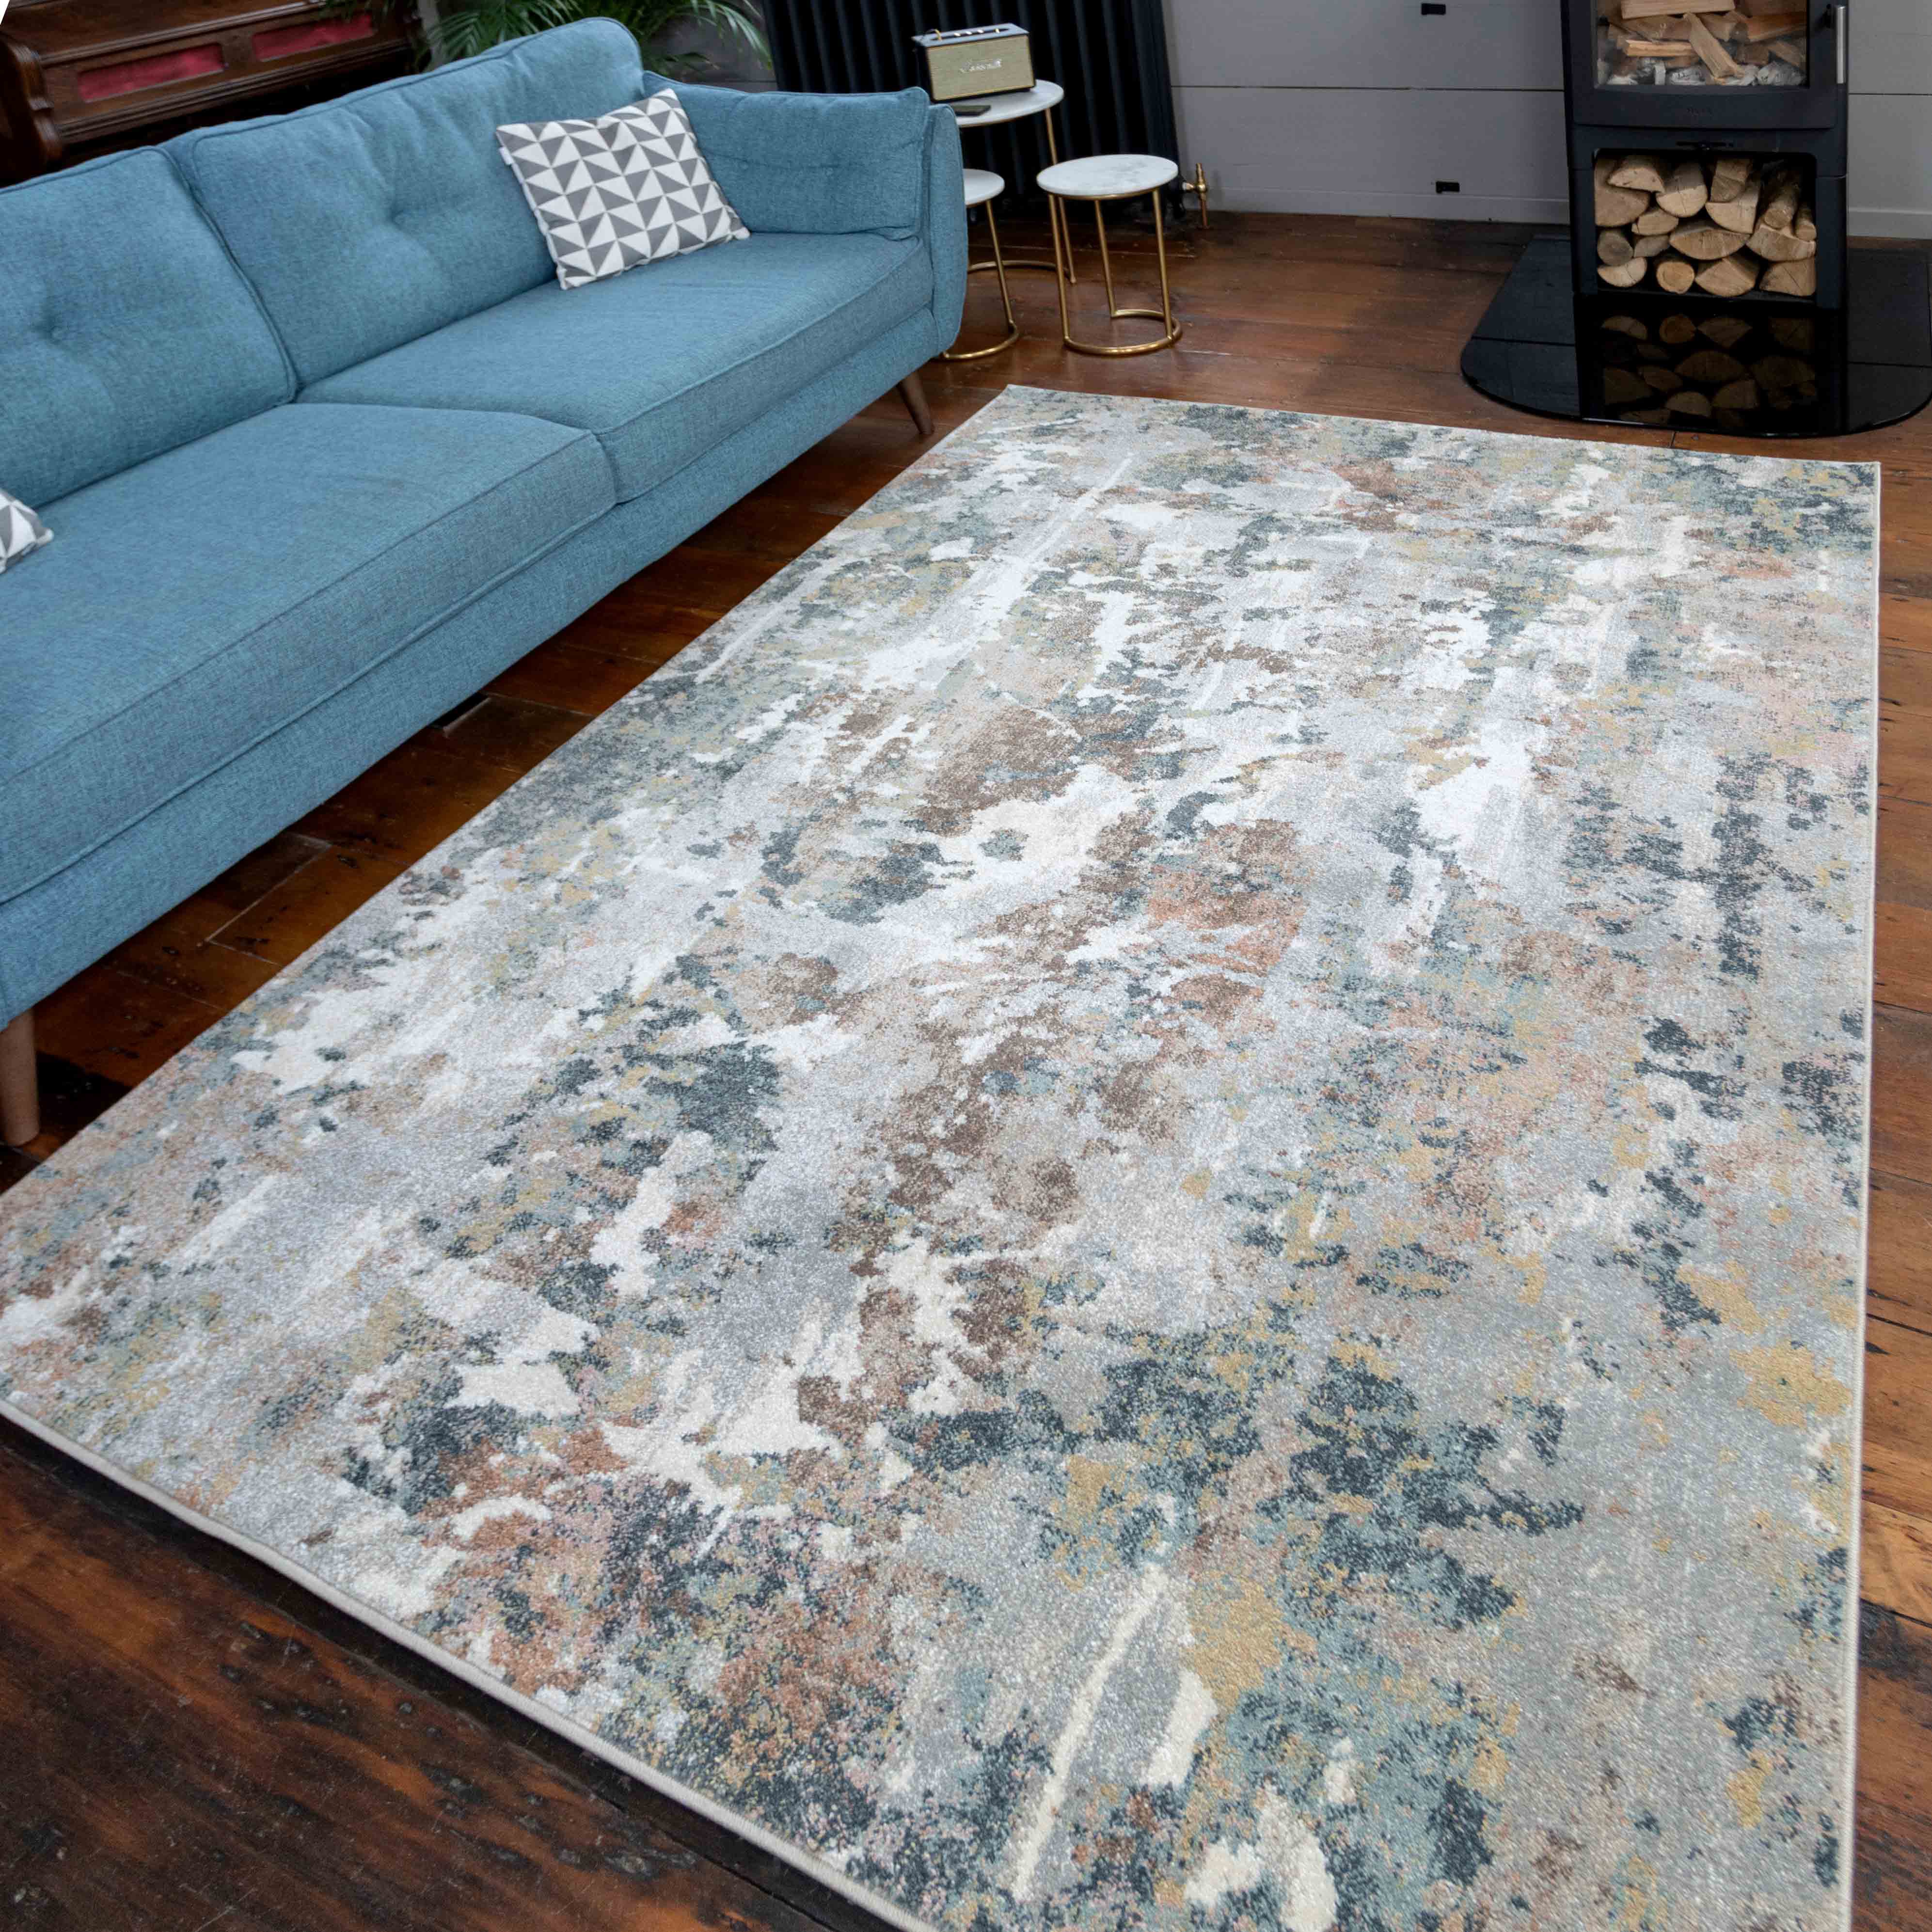 Soft Modern Blue Grey Painted Canvas Effect Rugs - Riviera